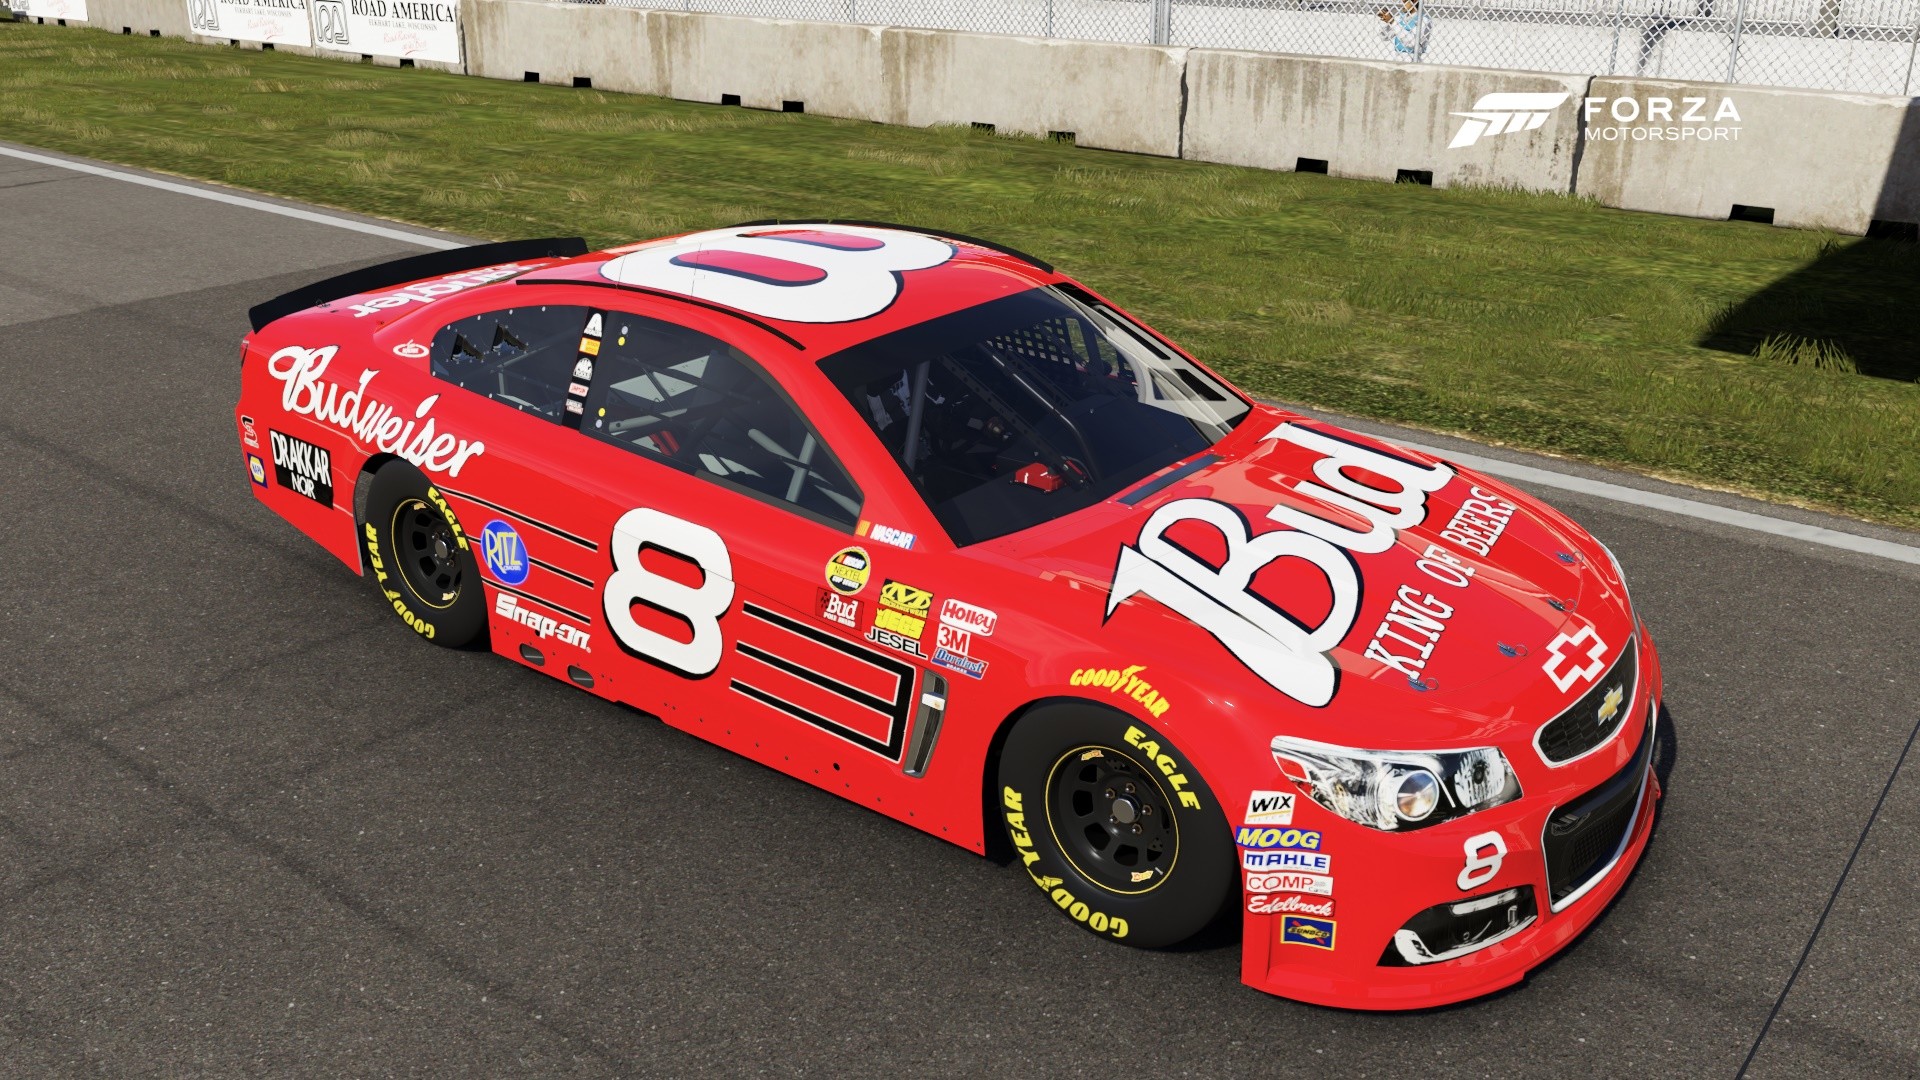 1920x1080 2003 NASCAR Winston Cup Season when Dale Earnhardt Jr drove the #8  Budweiser Chevy for his dad's race team Dale Earnhardt Inc. (shared on #88  Nationwide ...